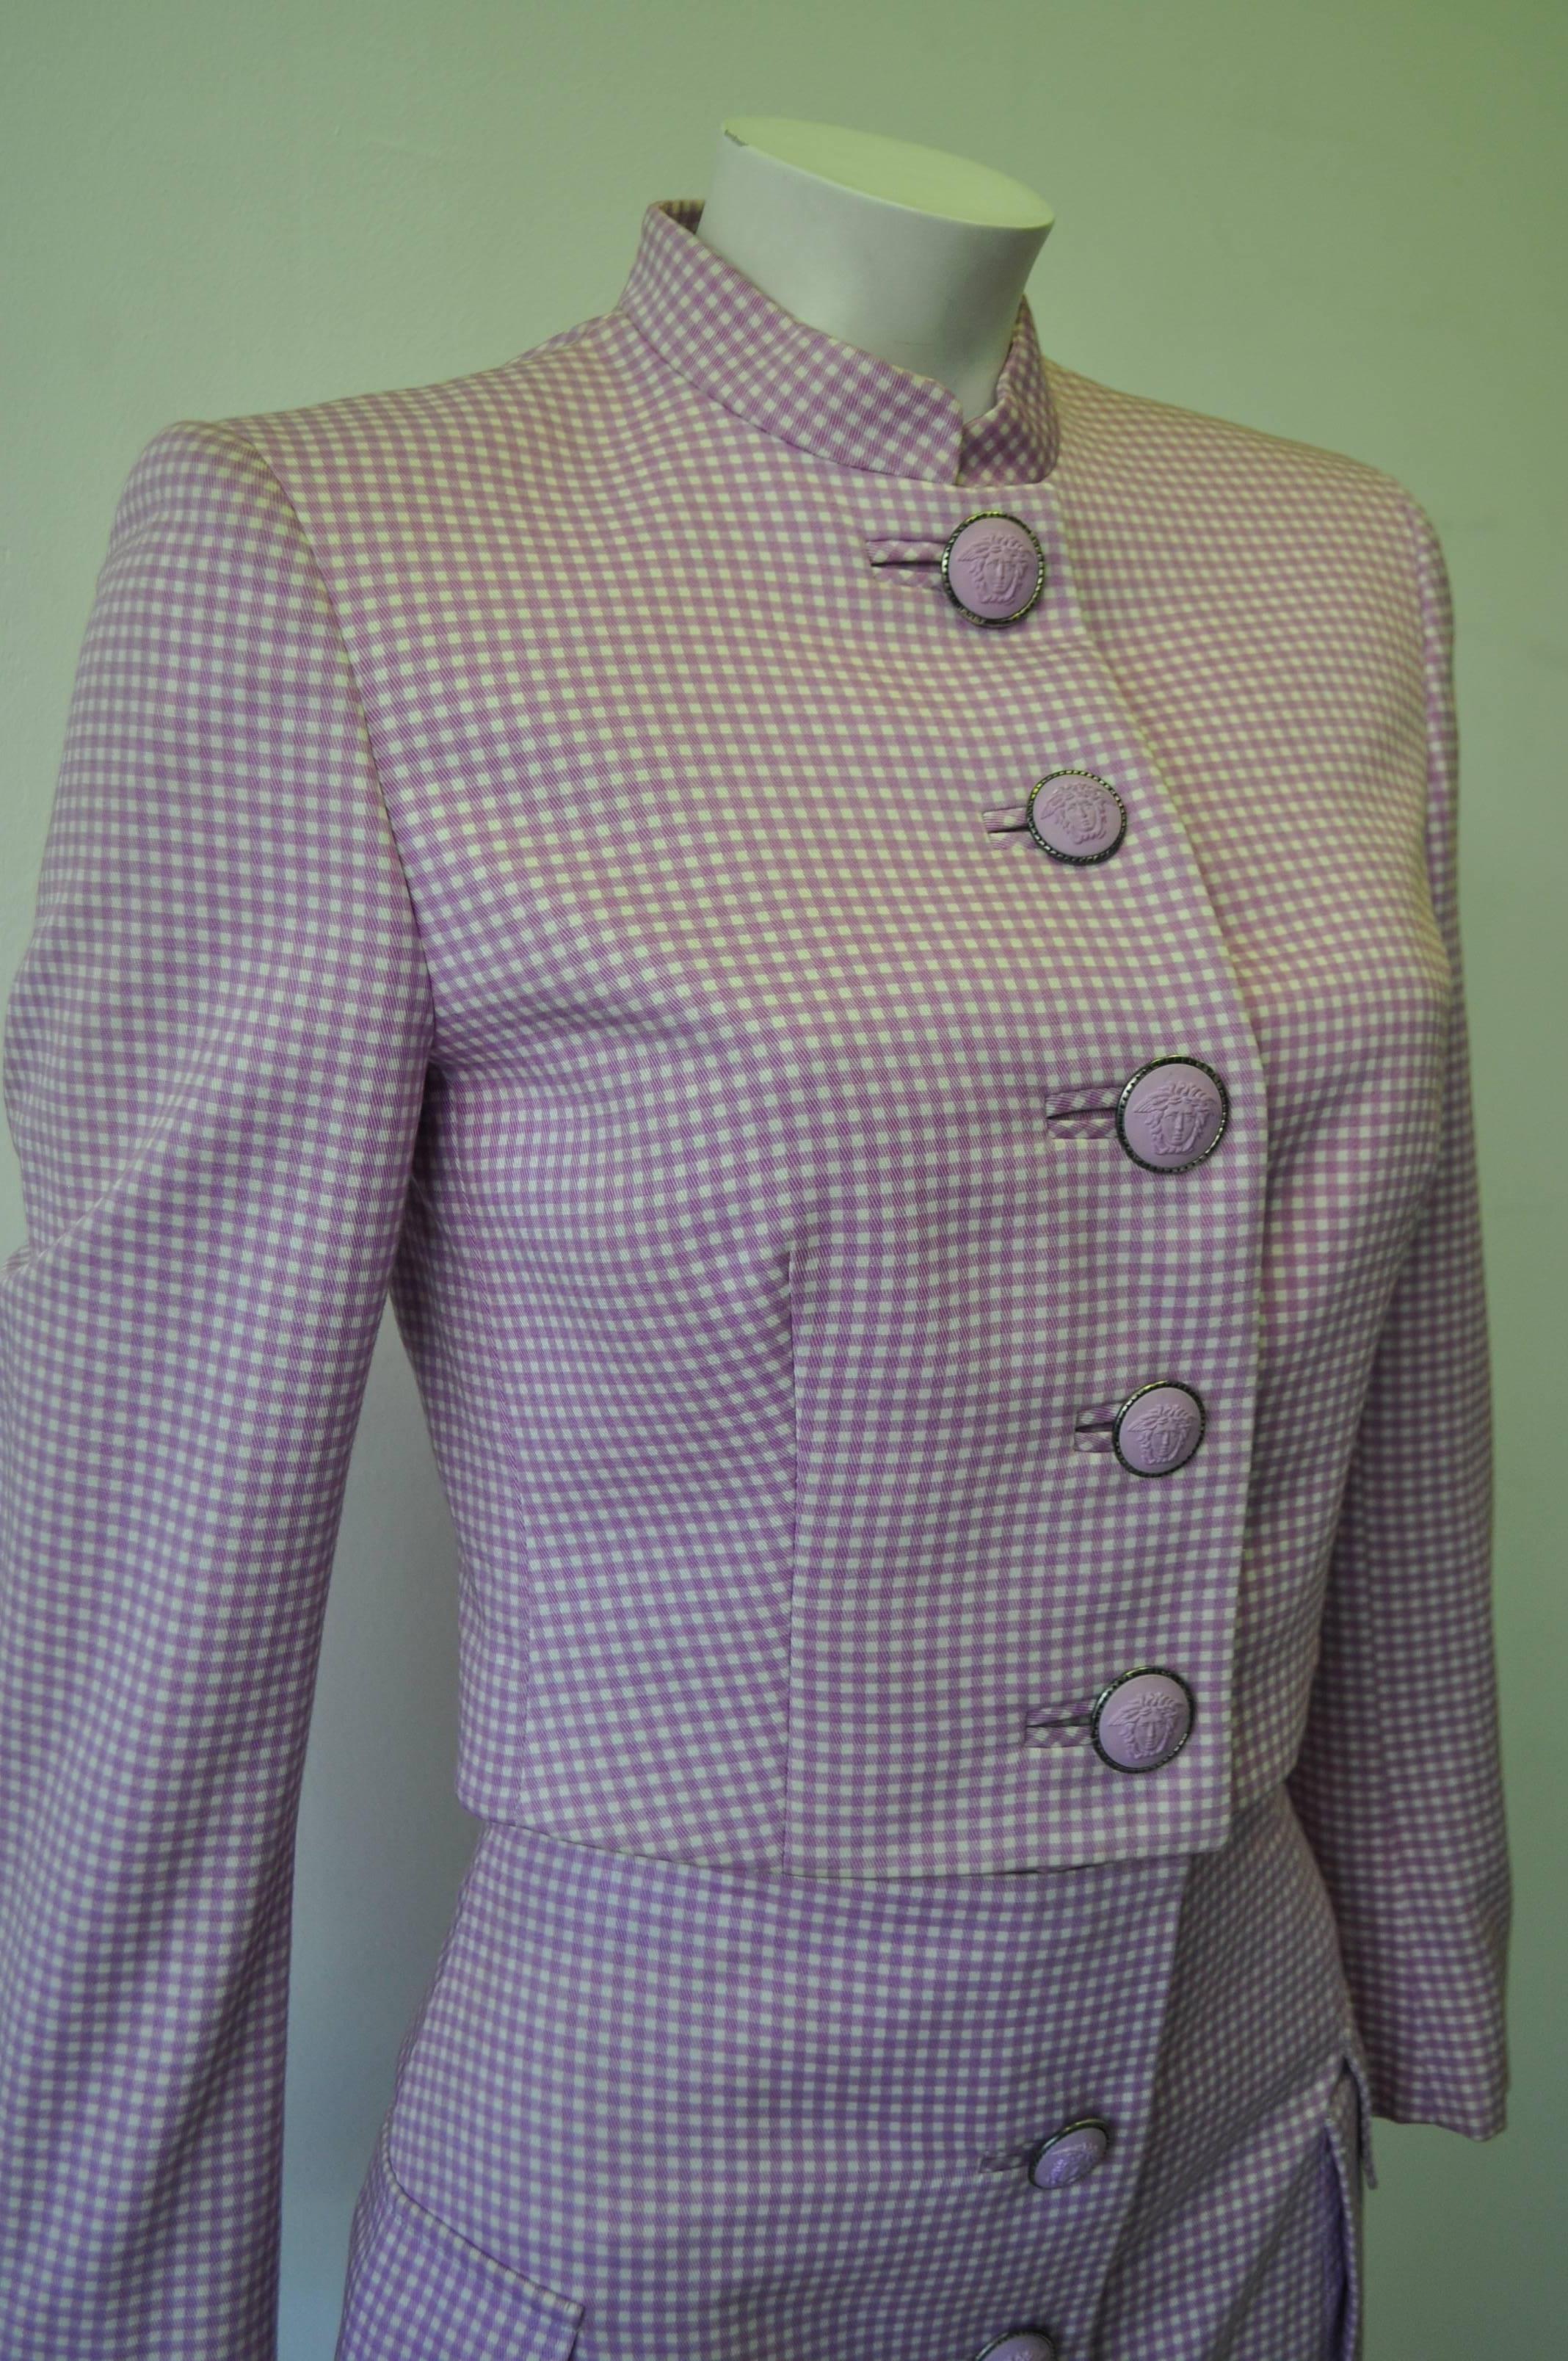 Gray Exceptional Gianni Versace Couture Check Skirt Suit featuring Medusa Buttons For Sale